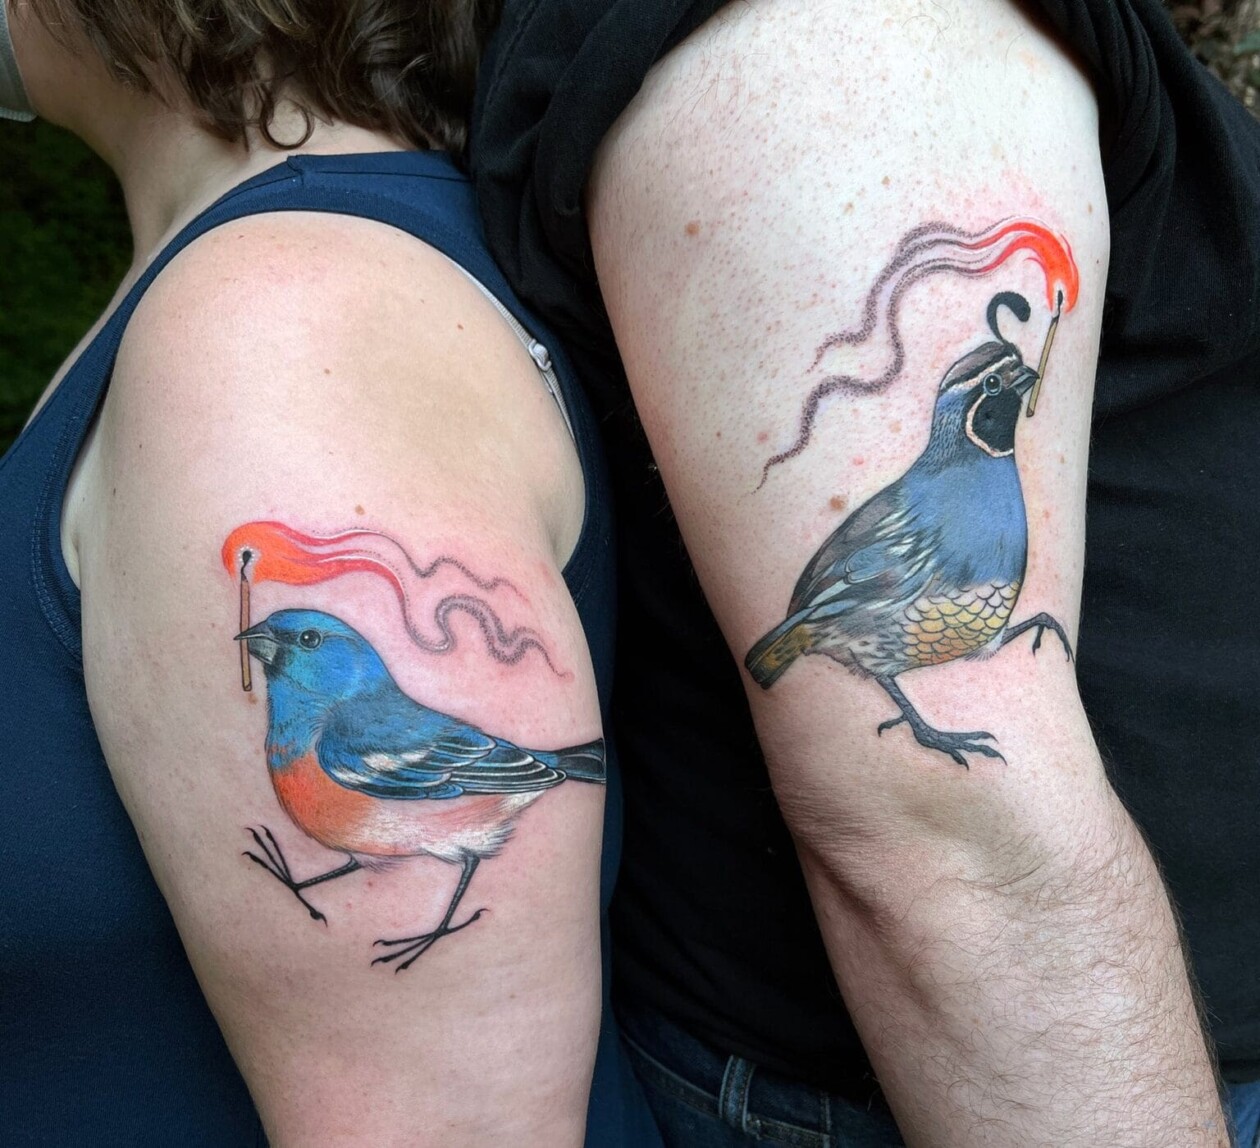 Stephanie Brown Creates Whimsical Tattoos Of Birds Holding A Lit Match Symbolizing Hope For A Better Future (1)